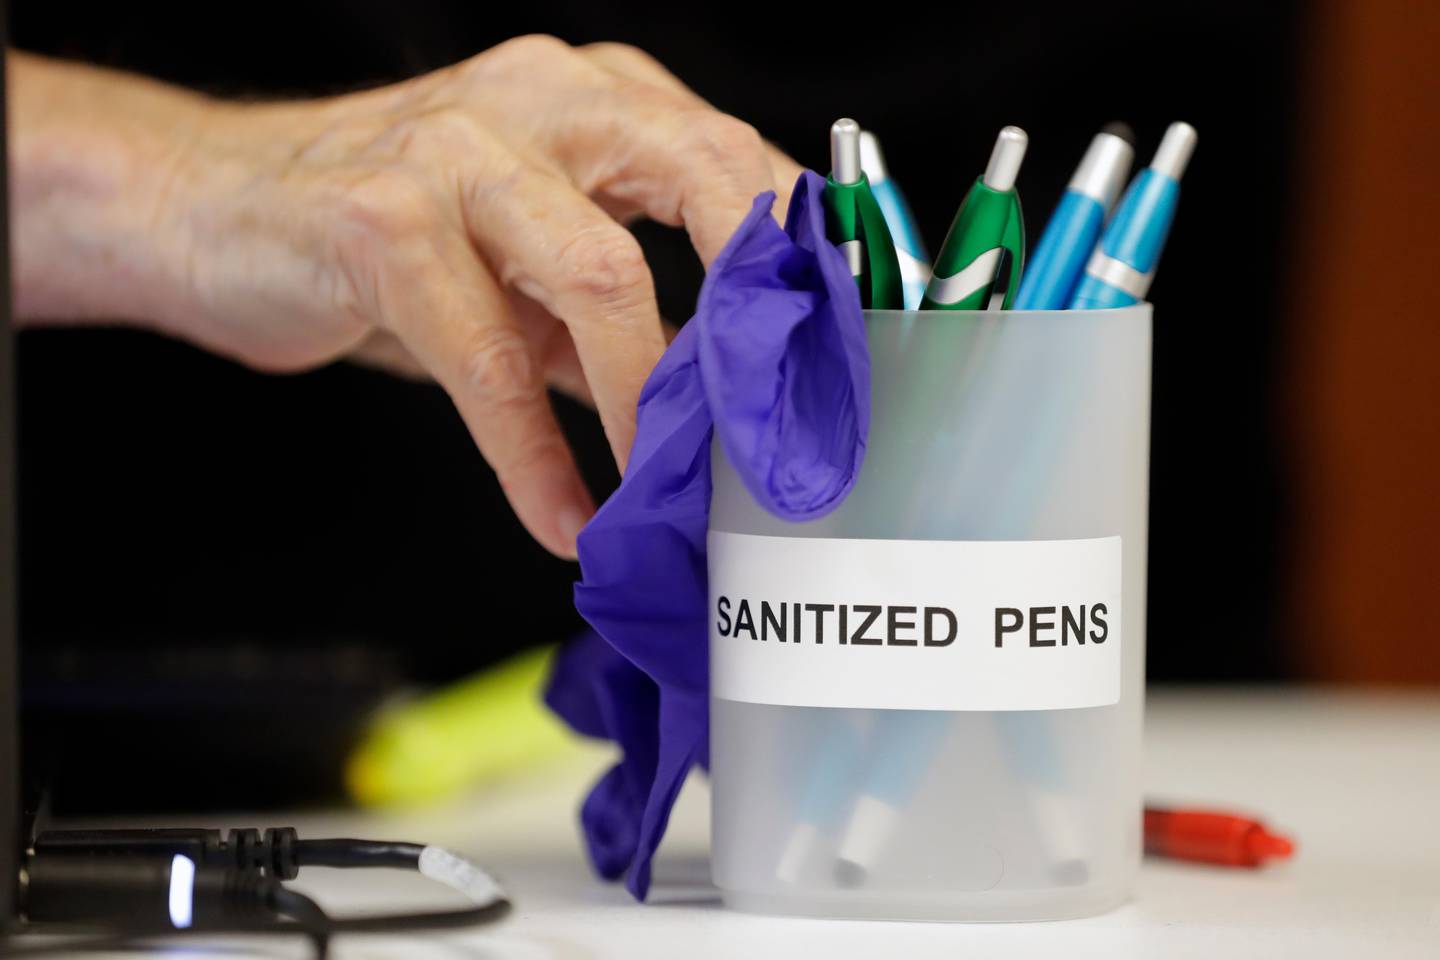 A poll worker pushes a container of sanitized pens to a voter to be used in voting Thursday, Aug. 6, 2020, in Brentwood, Tenn. The state is encouraging voters to wear masks and follow social distancing protocols at the polls. (AP Photo/Mark Humphrey)